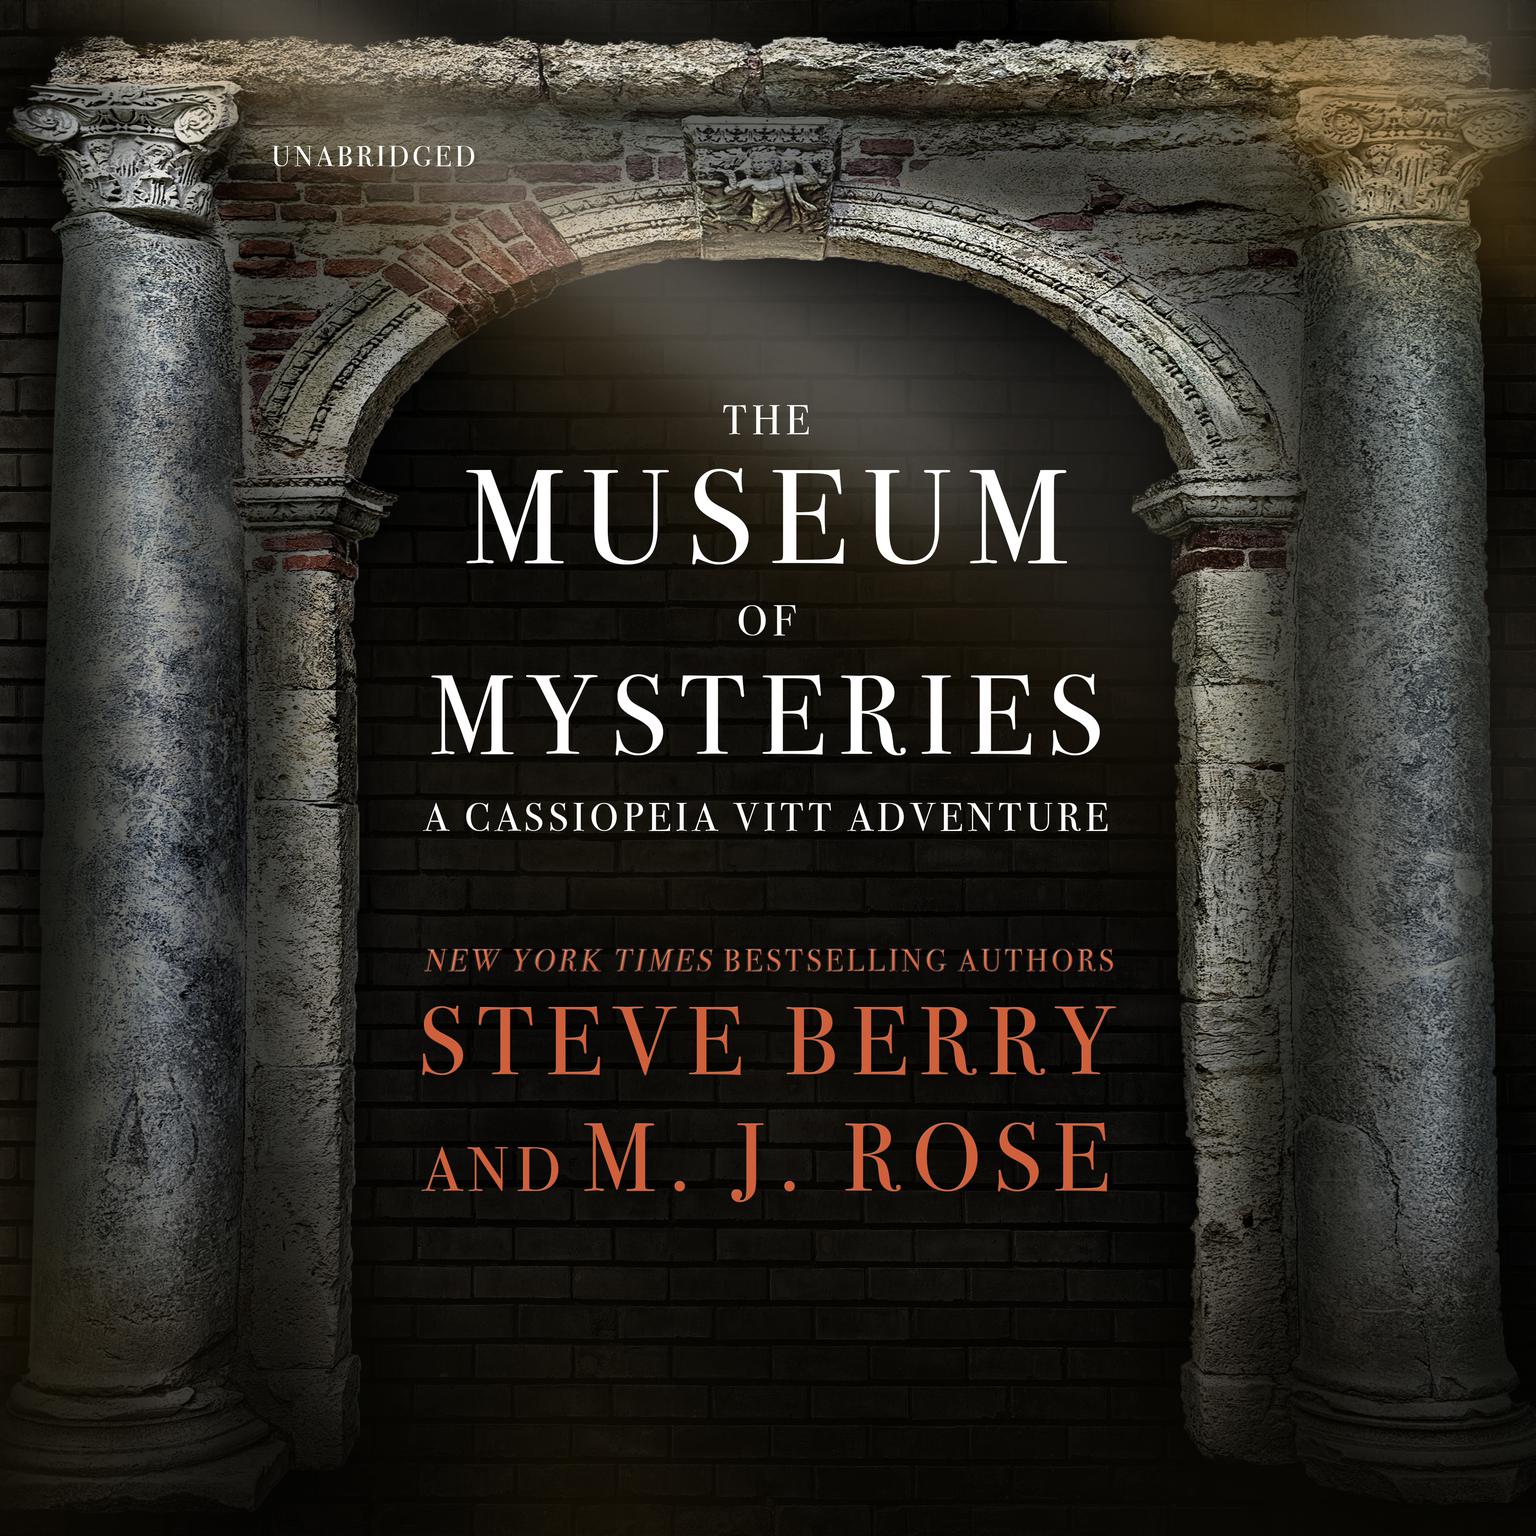 The Museum of Mysteries: A Cassiopeia Vitt Adventure Audiobook, by Steve Berry